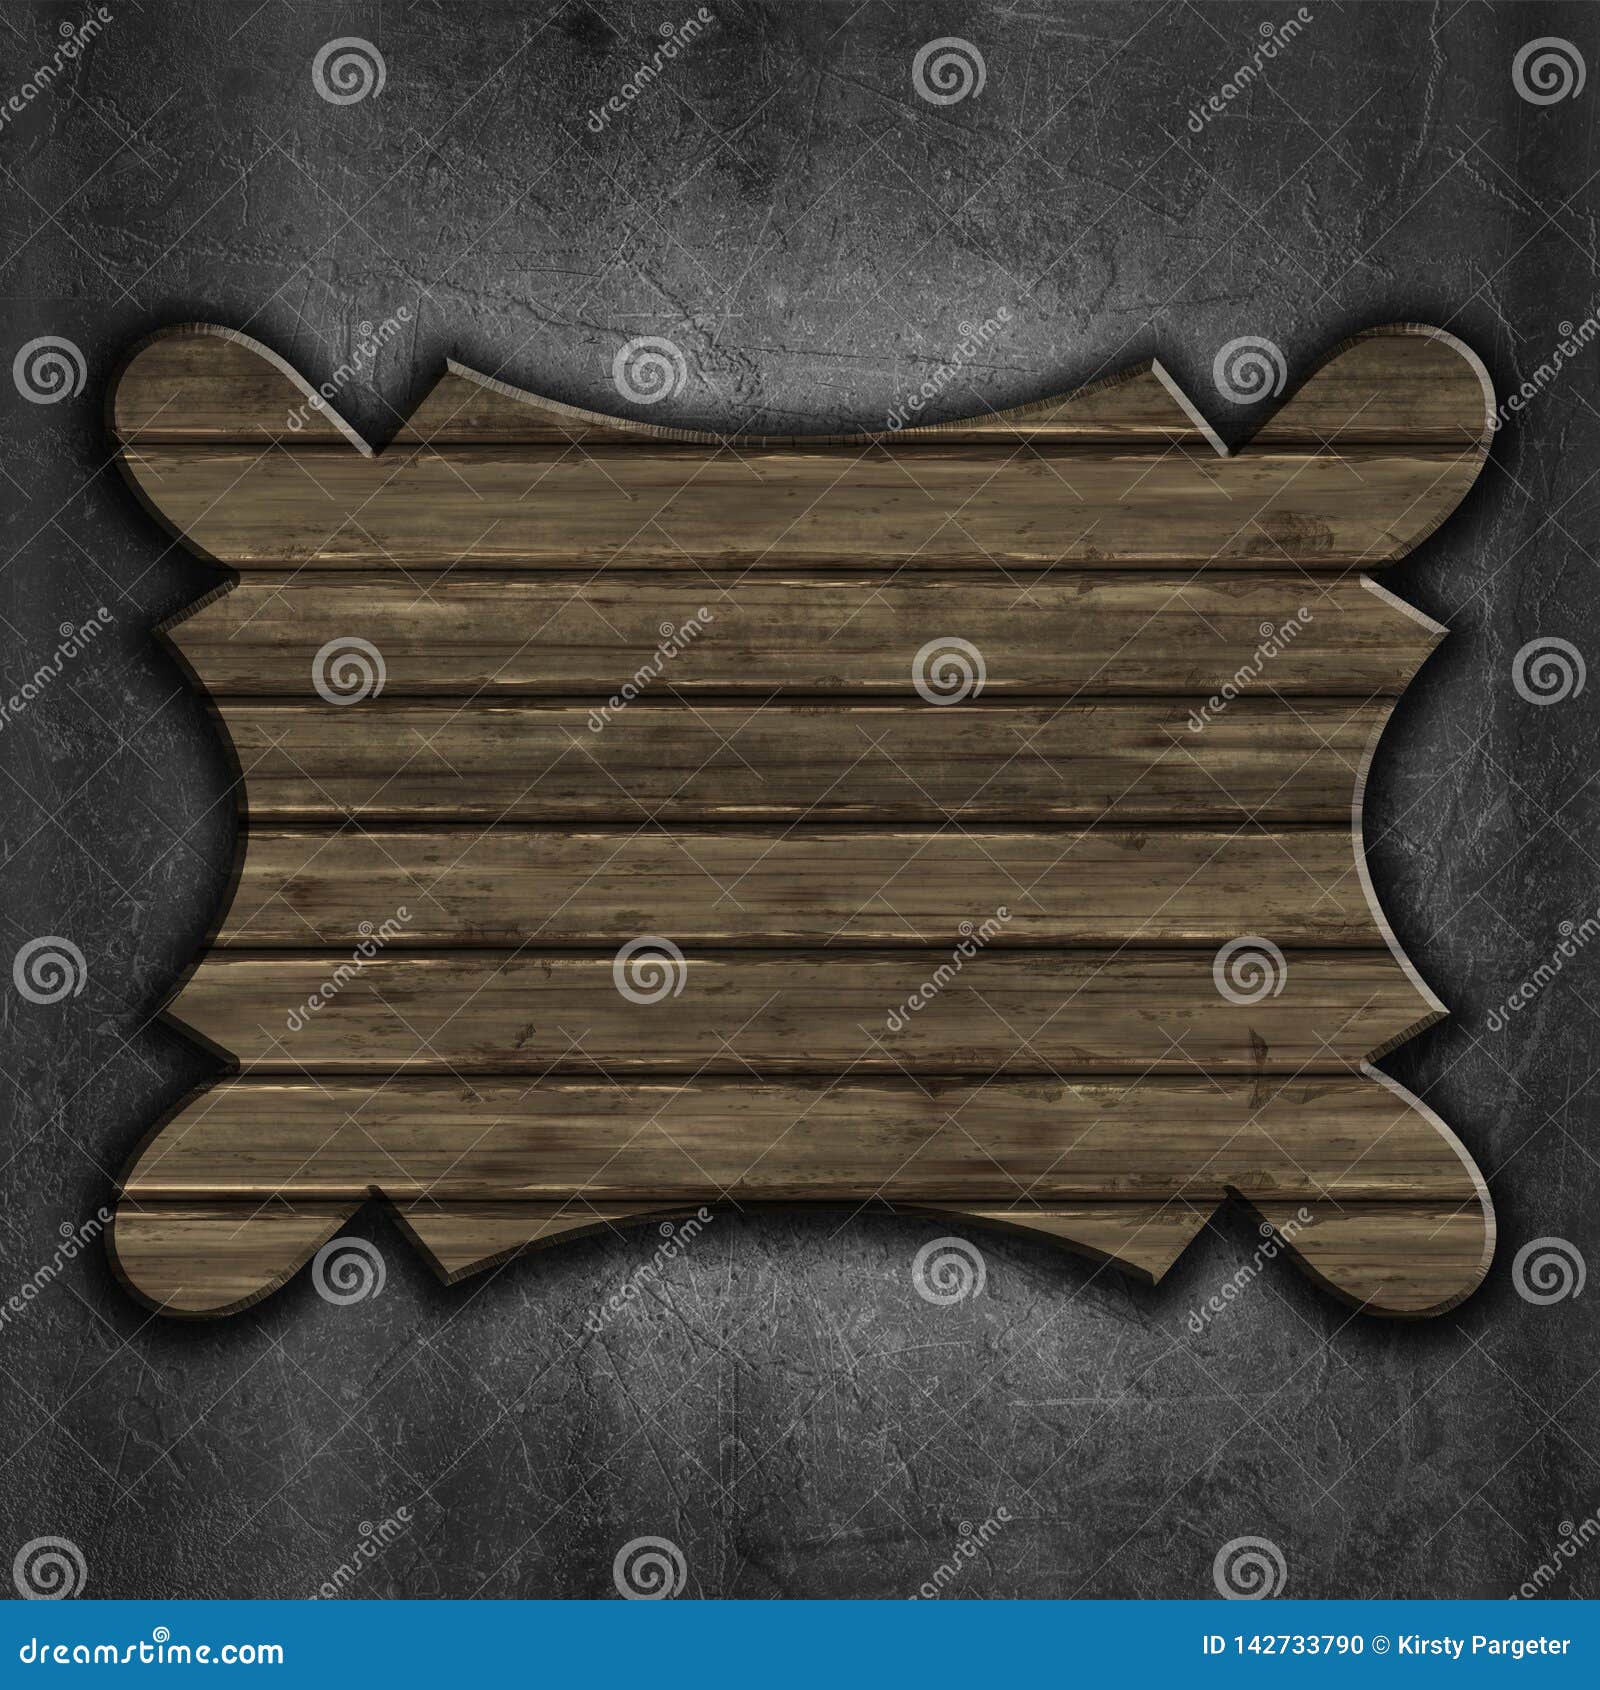 Wooden Scratched Parquetry Pattern. Seamless Wooden Planks With ...